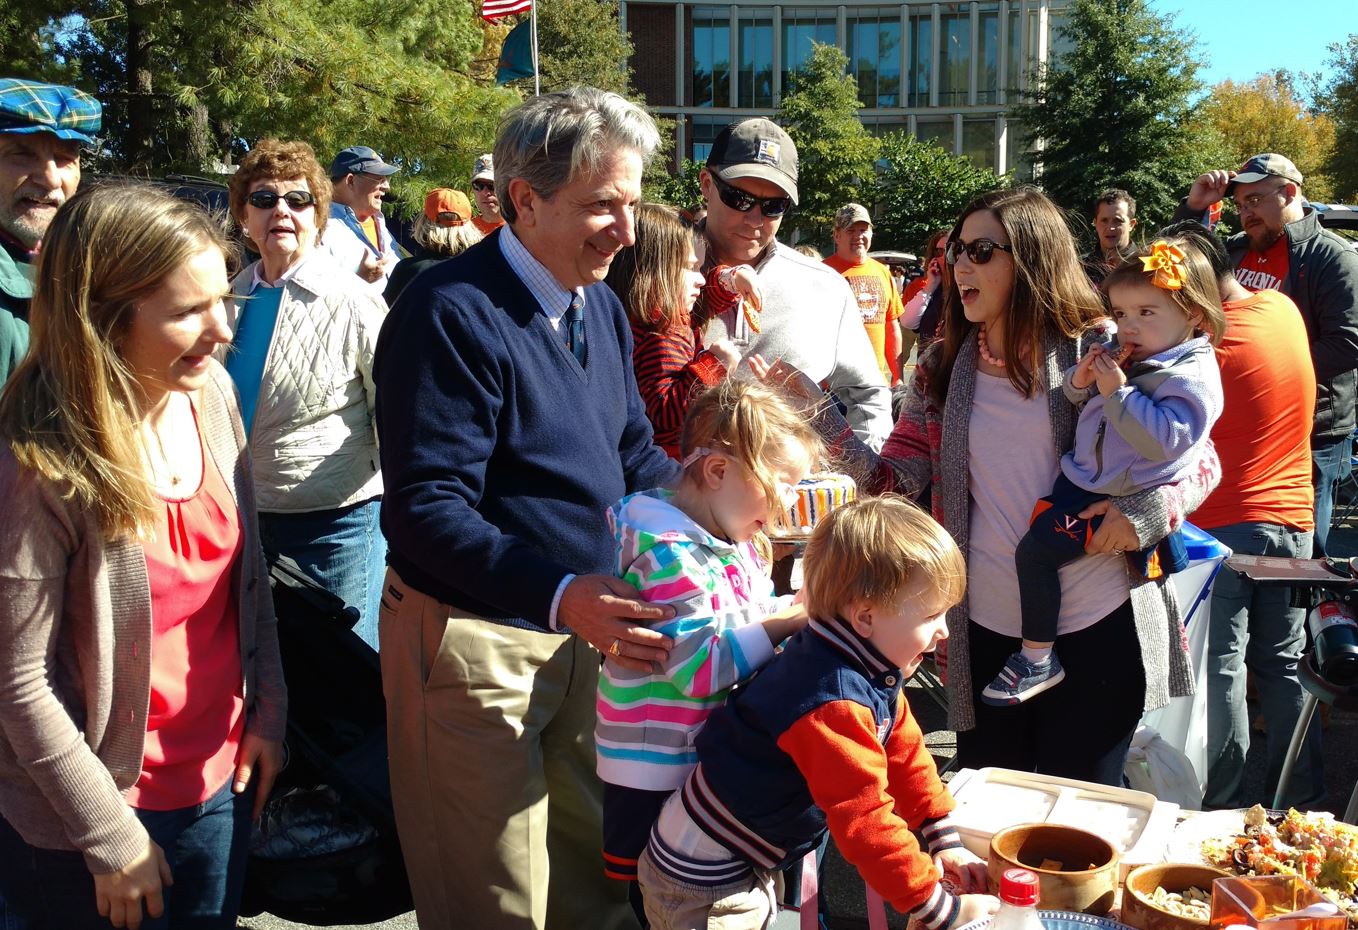 Dr. Fierro with his family tailgating at a UVA football game